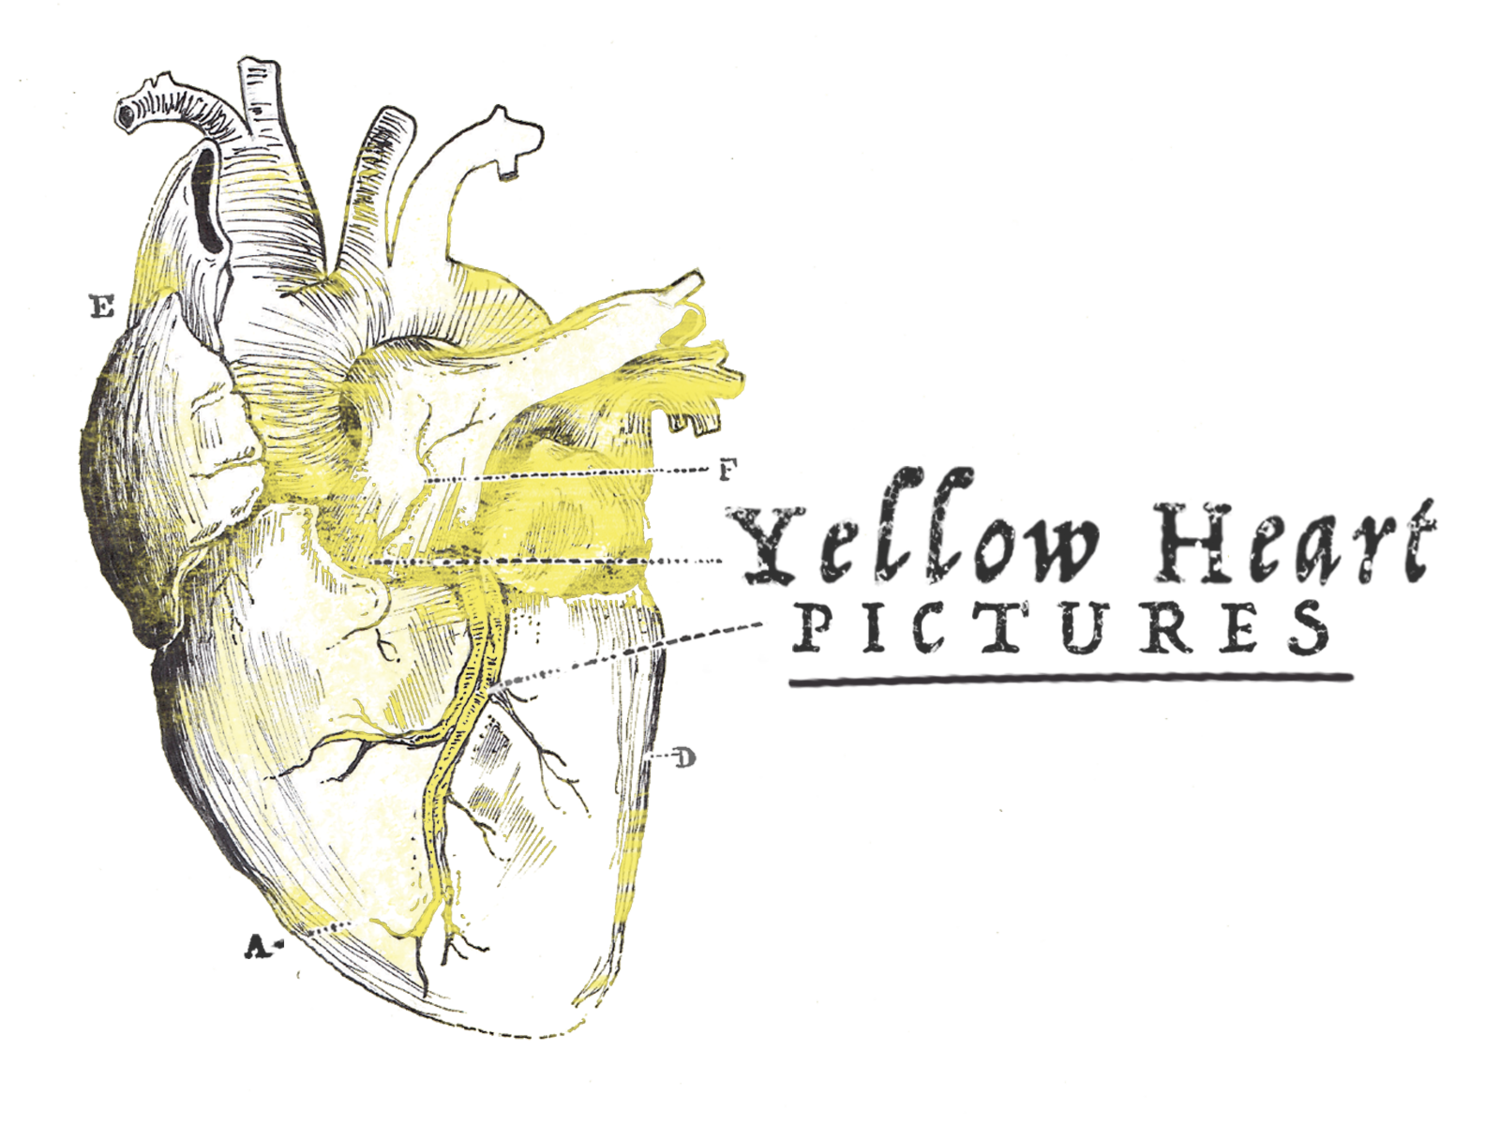 Yellow Heart Pictures